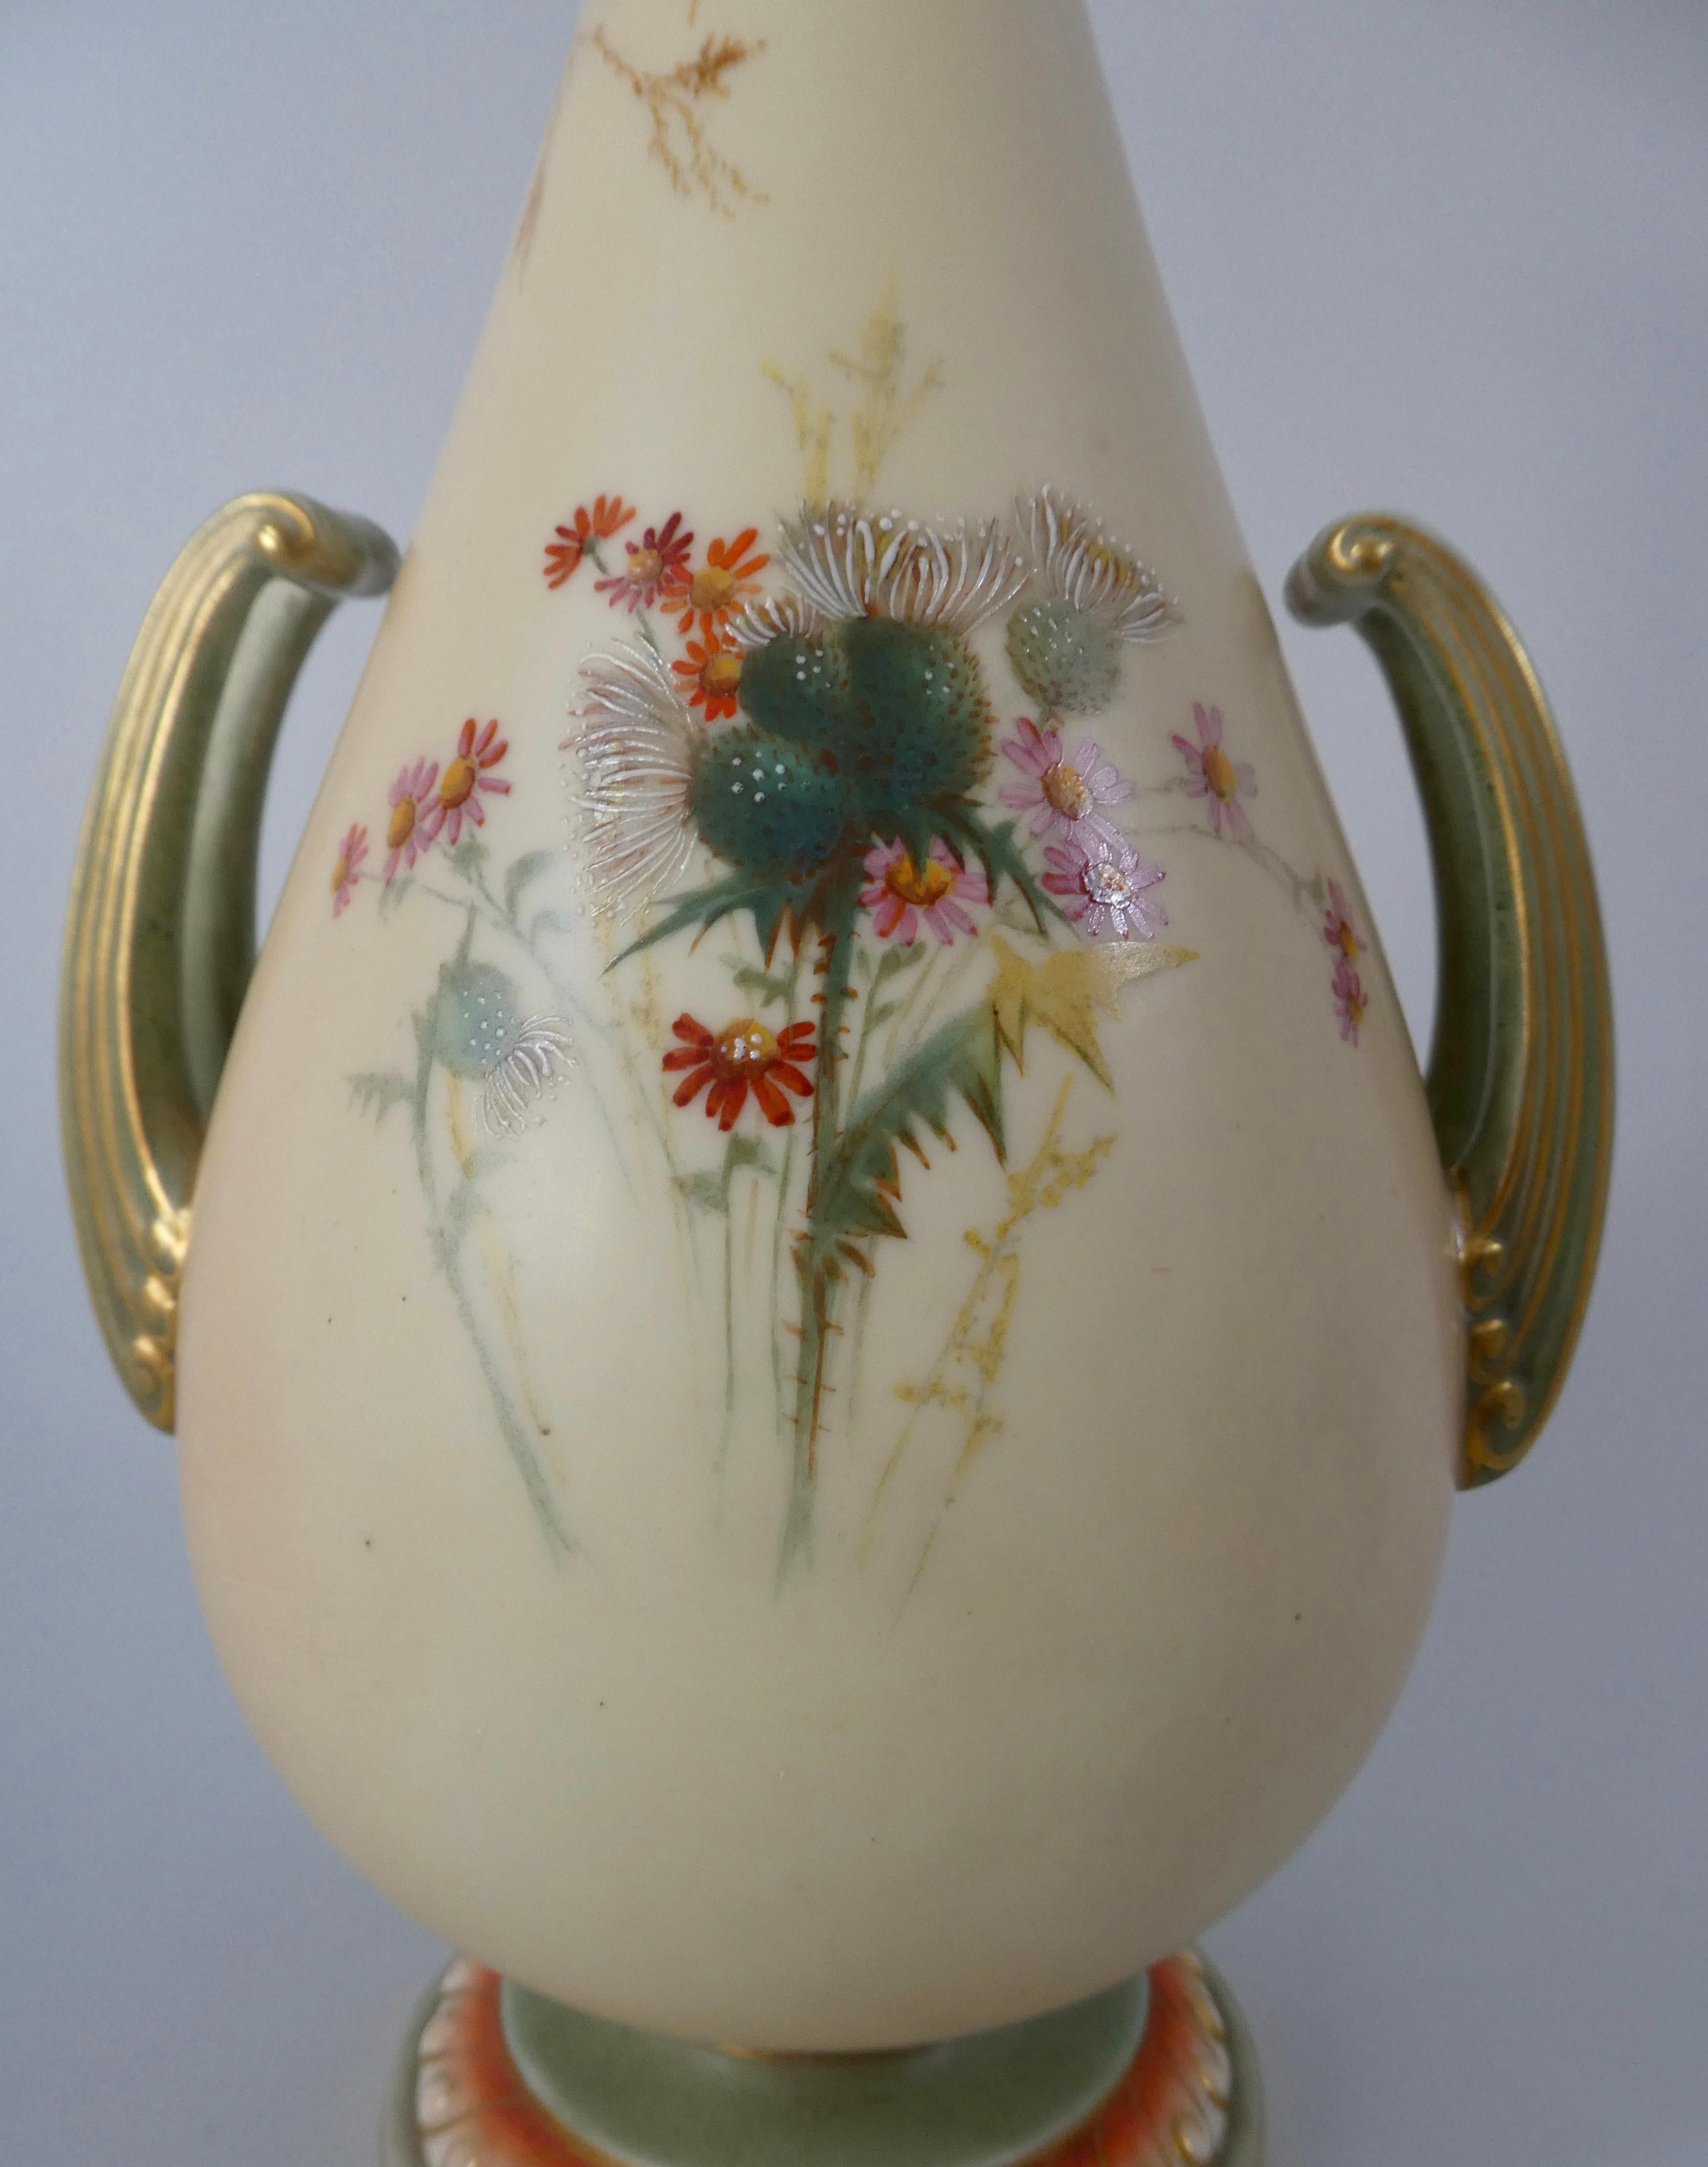 Early 20th Century Royal Worcester Porcelain Vase, Thistle Decoration, Dated 1901